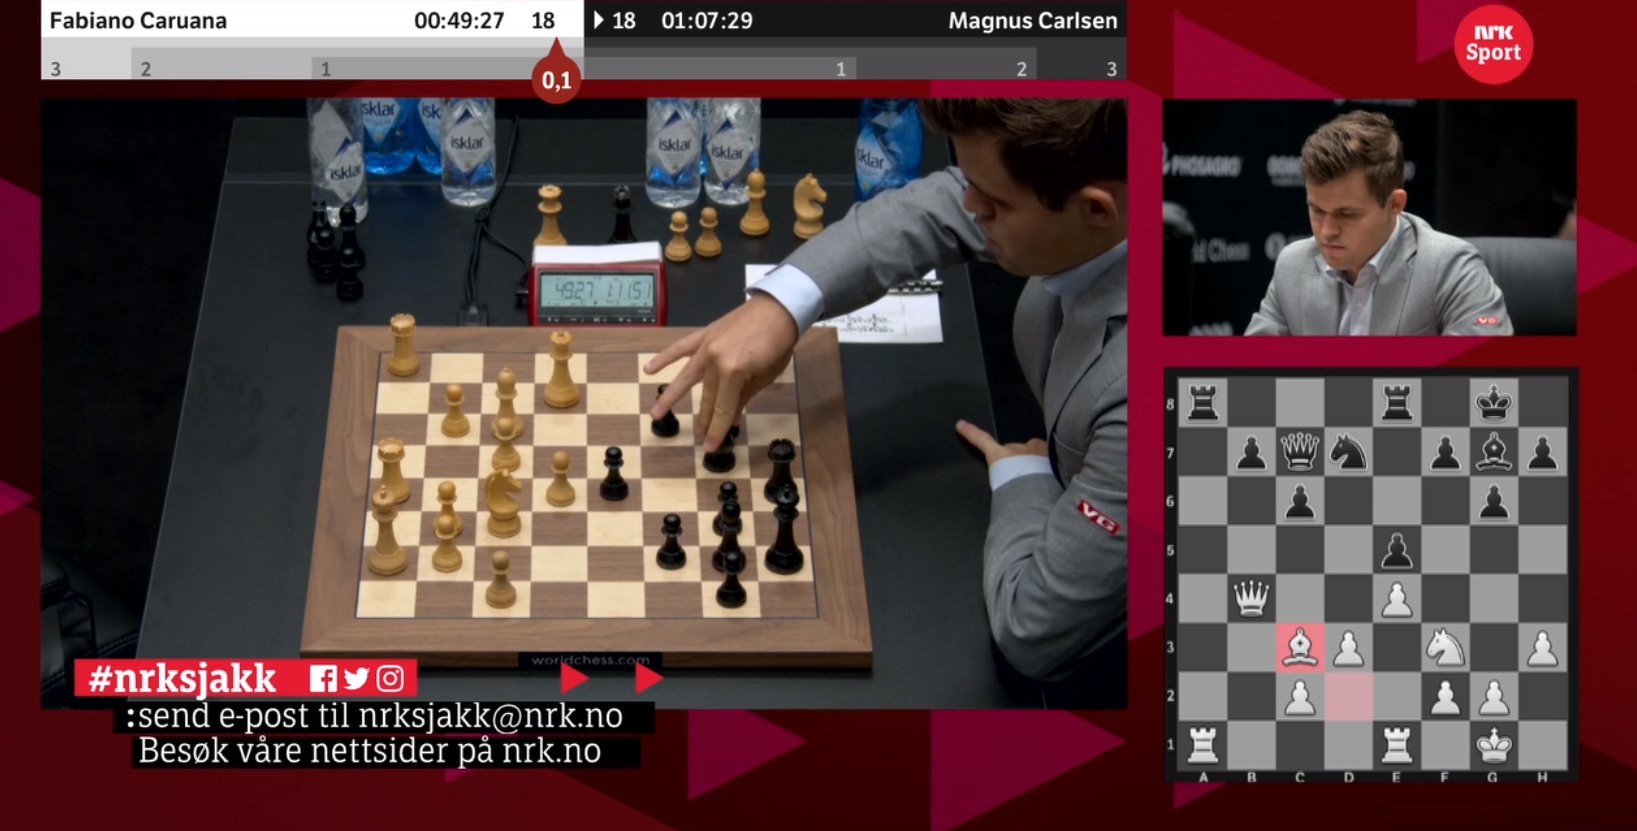 Tarjei J. Svensen on Twitter: "Here's the situation on move 18: Carlsen  touches his knight, but does not appear to say "j'adoube". An arbiter  could've intervened and forced him to move the